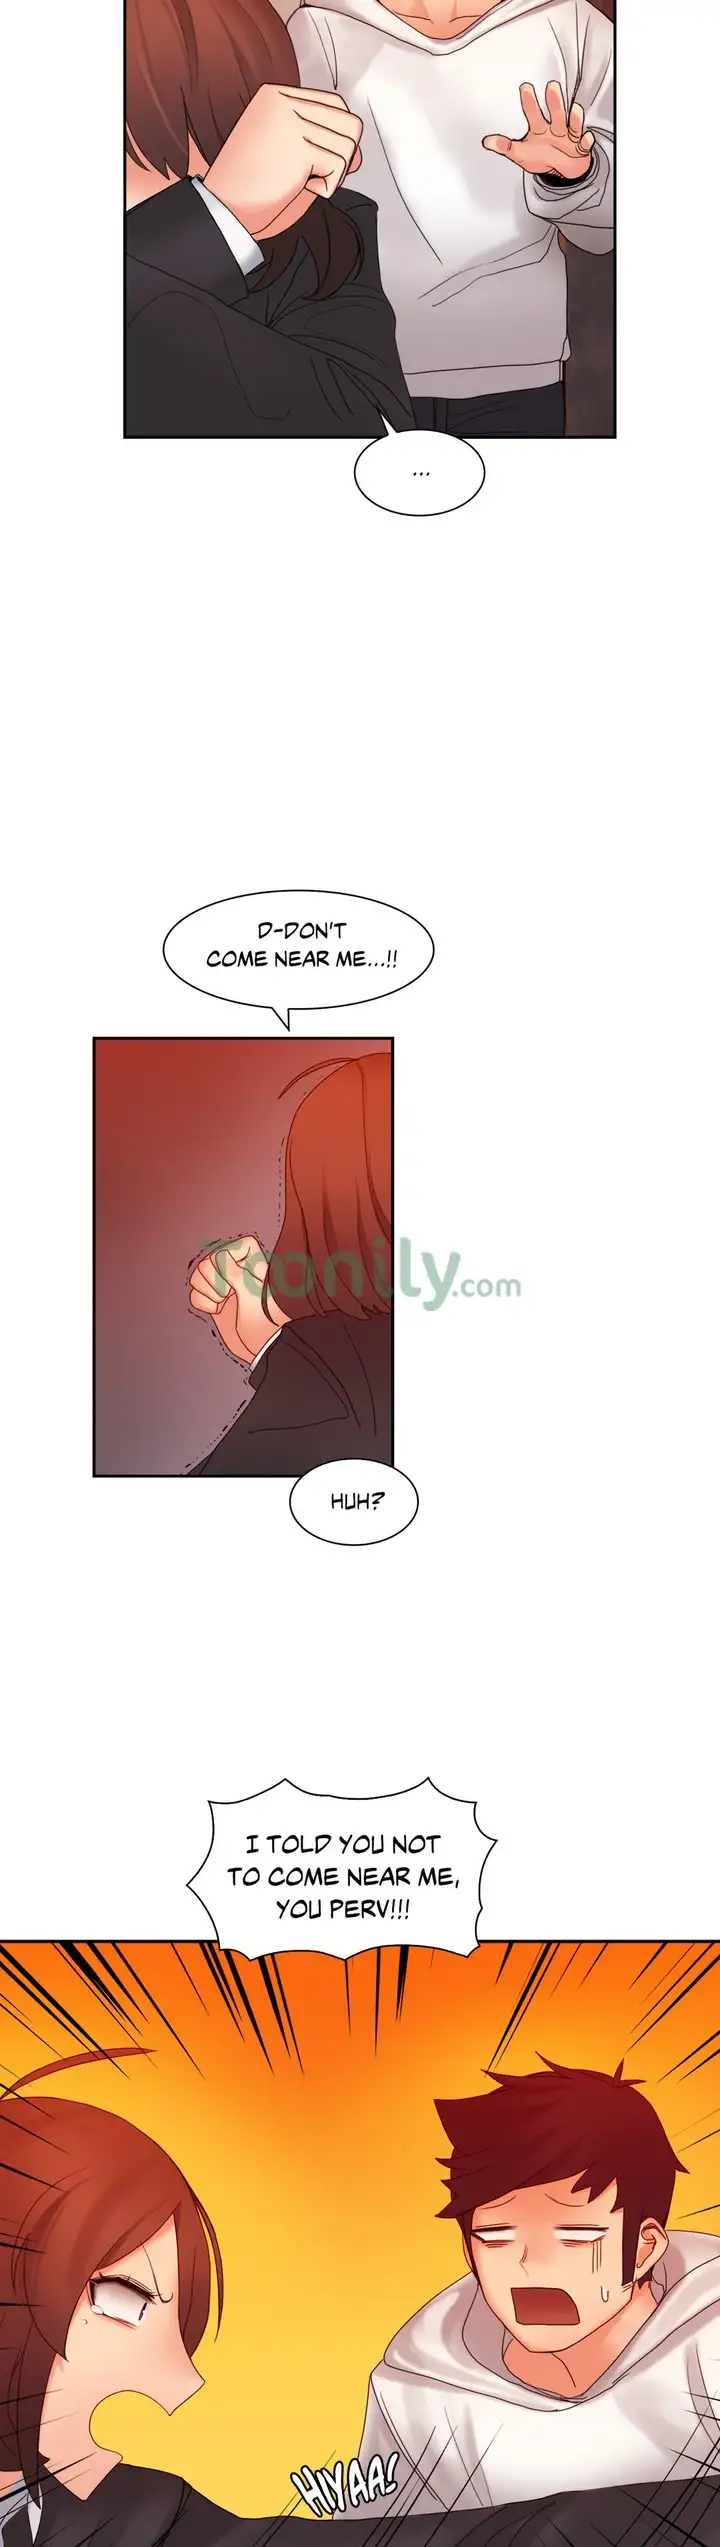 The Girl That Got Stuck in the Wall - Chapter 9 Page 4